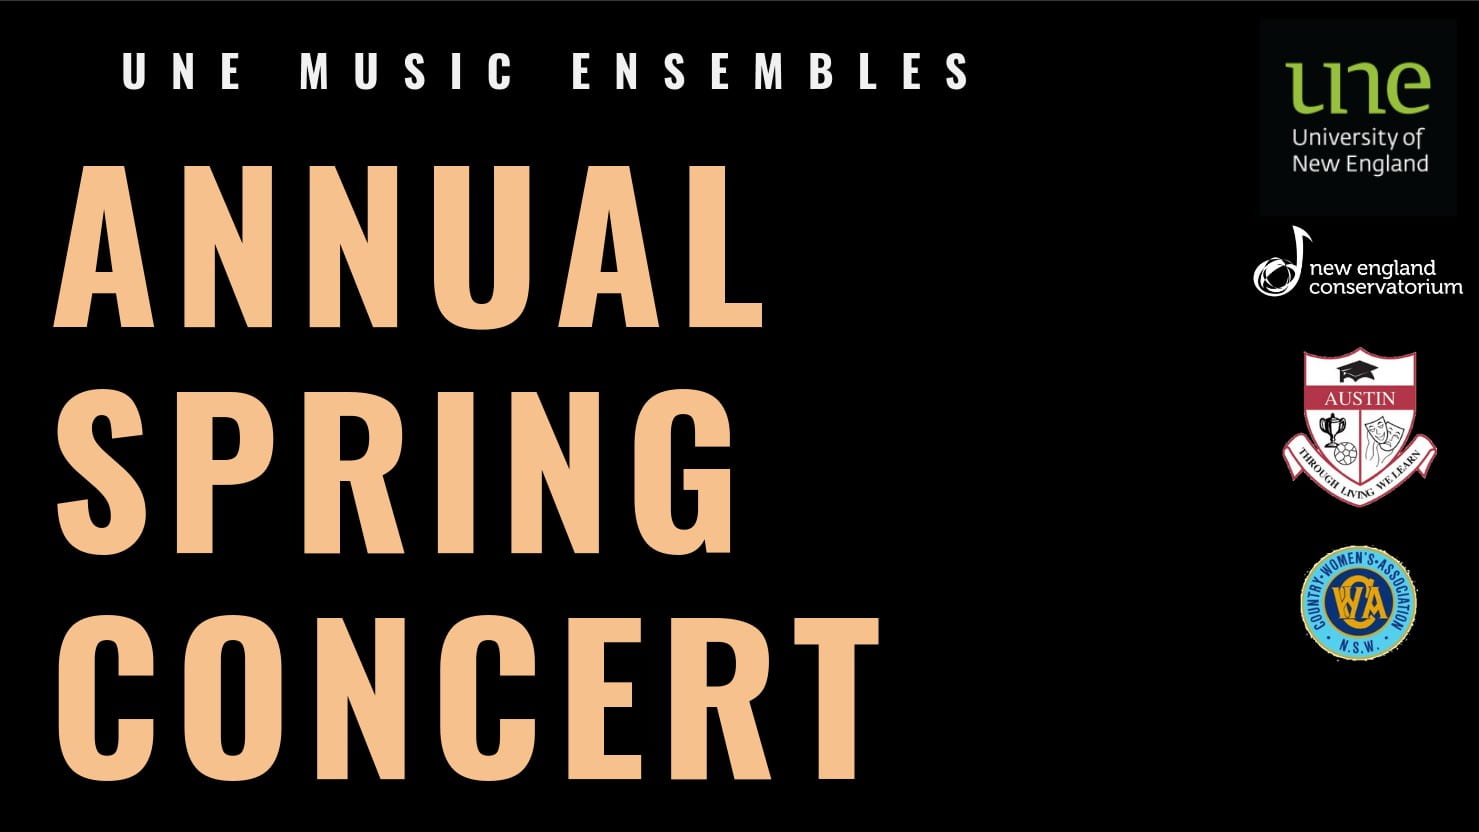 UNE Music Ensembles Annual Spring Concert – Thursday 26th September, 6pm; Get your tickets now!